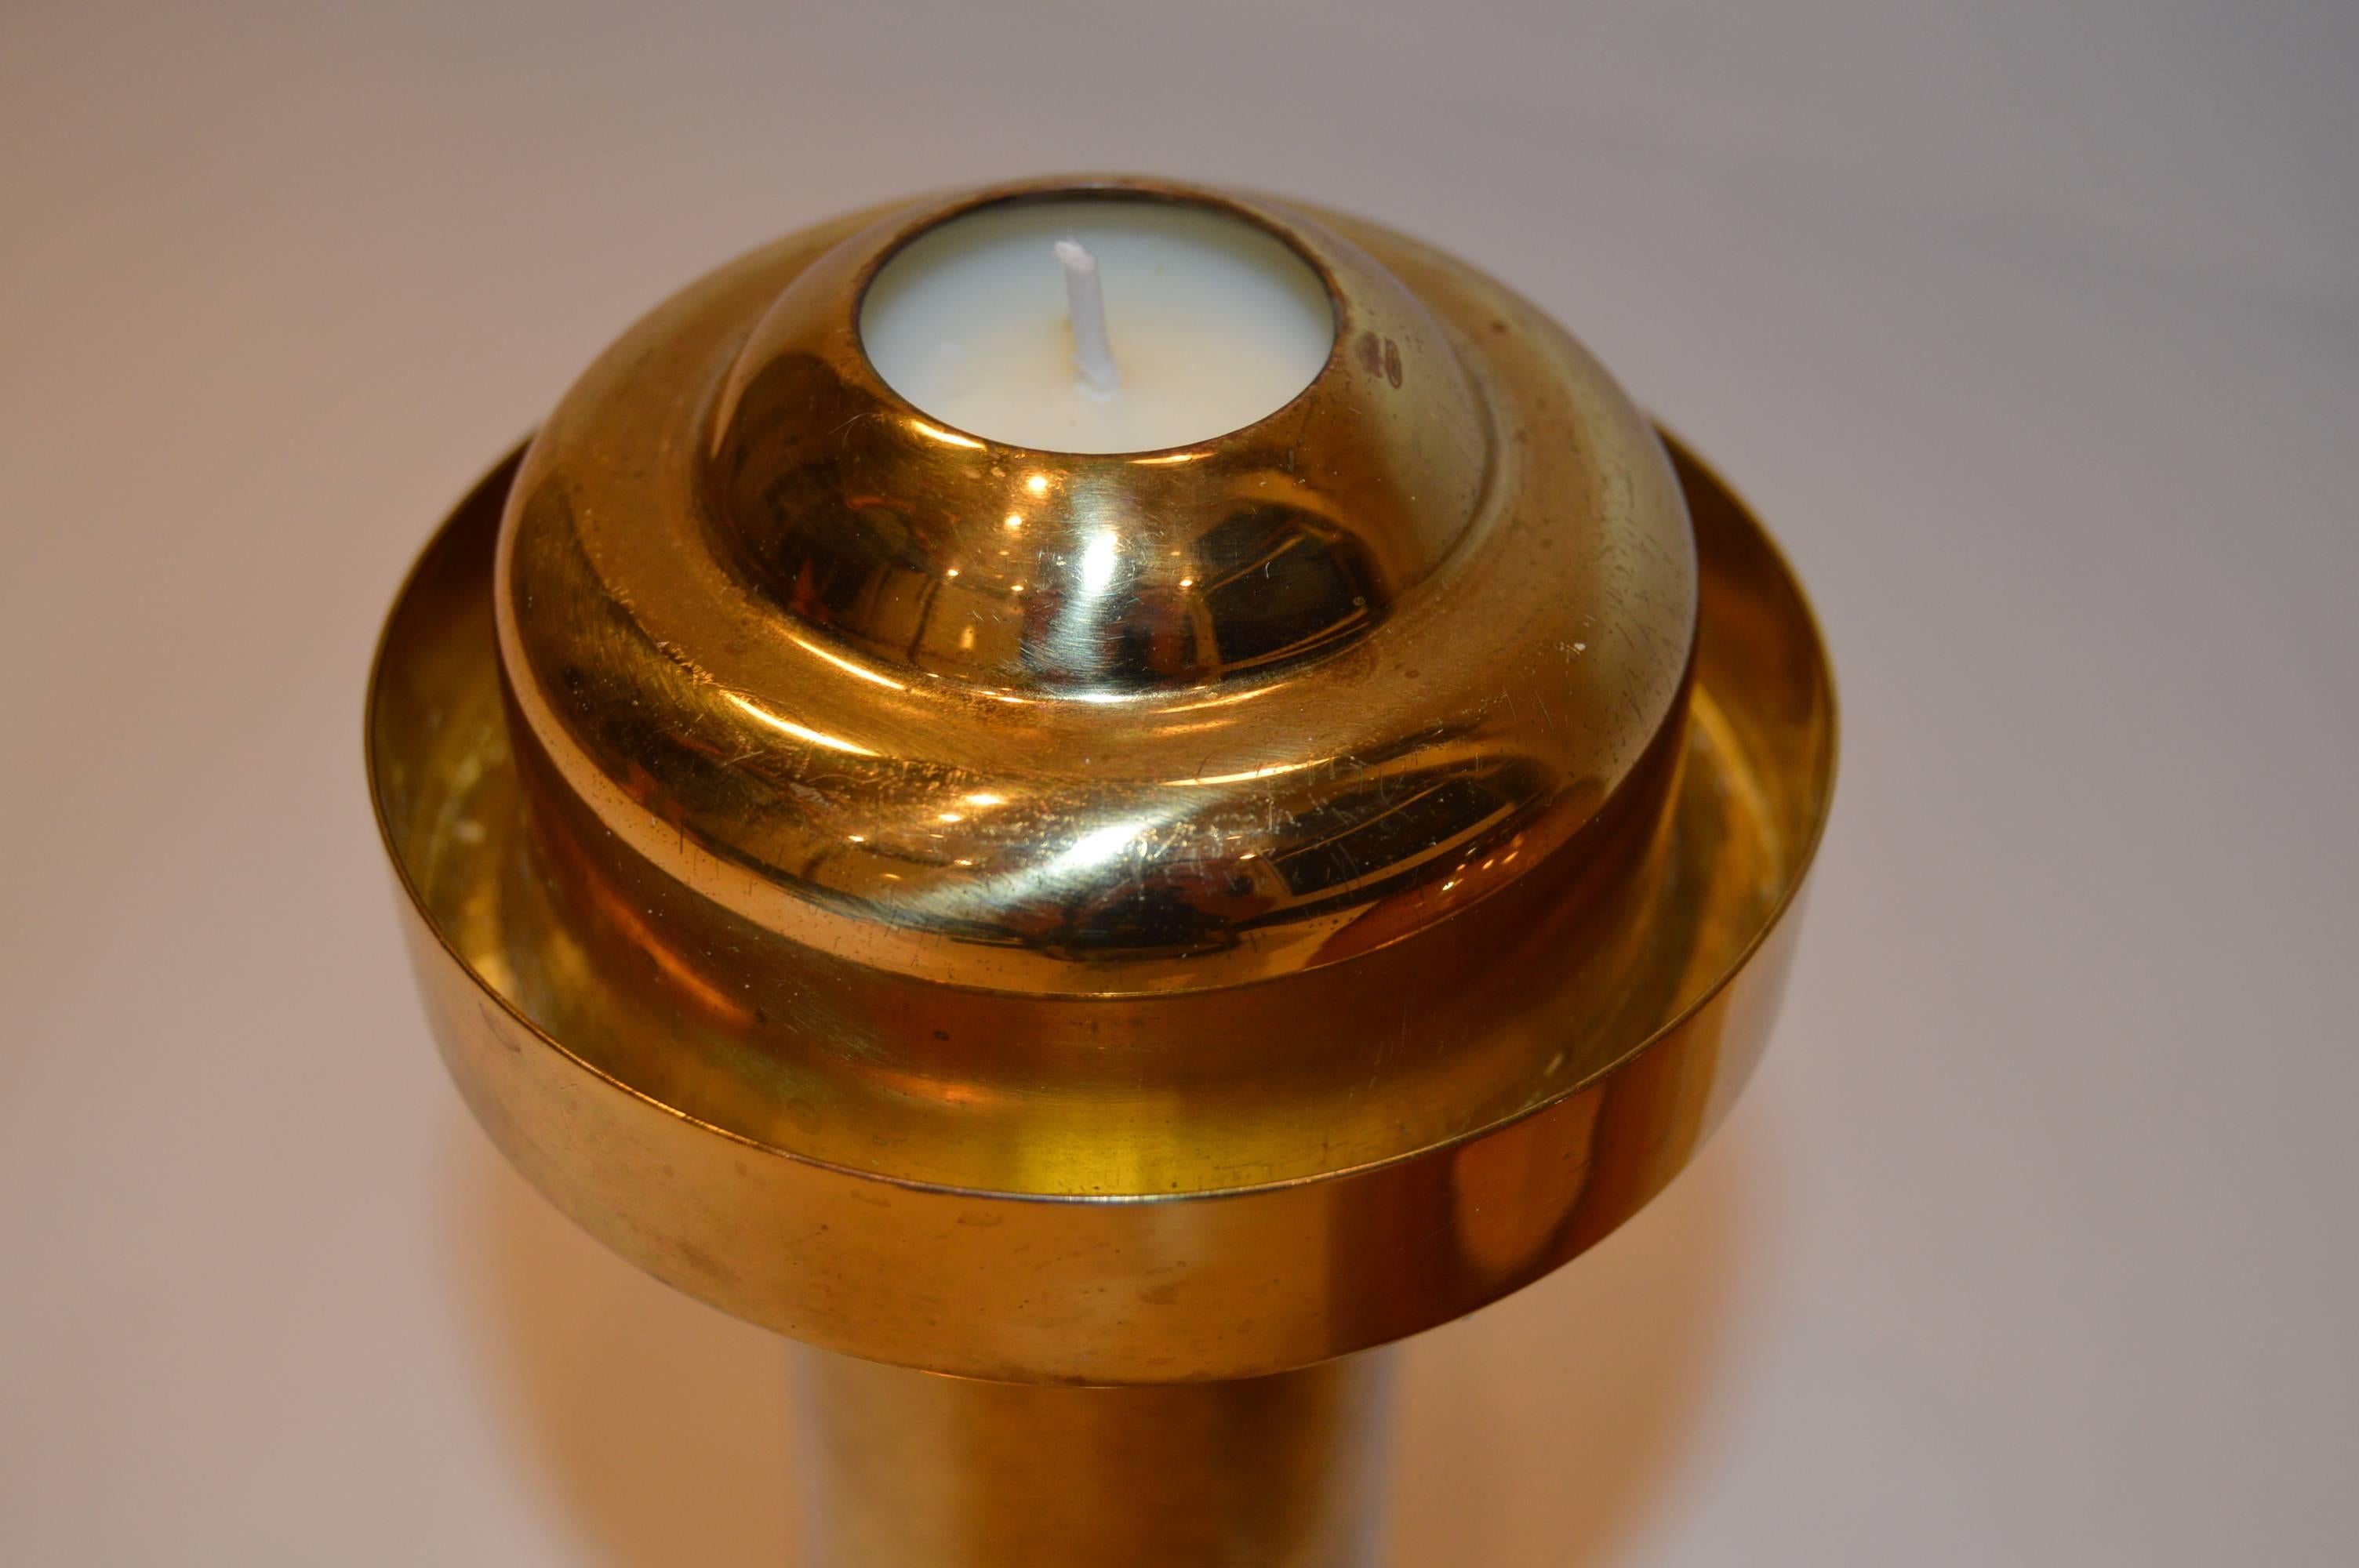 Elegant Brass and Glass L102/27 Candlestick from Hans-Agne Jakobsson, Markaryd In Excellent Condition For Sale In Alvesta, SE